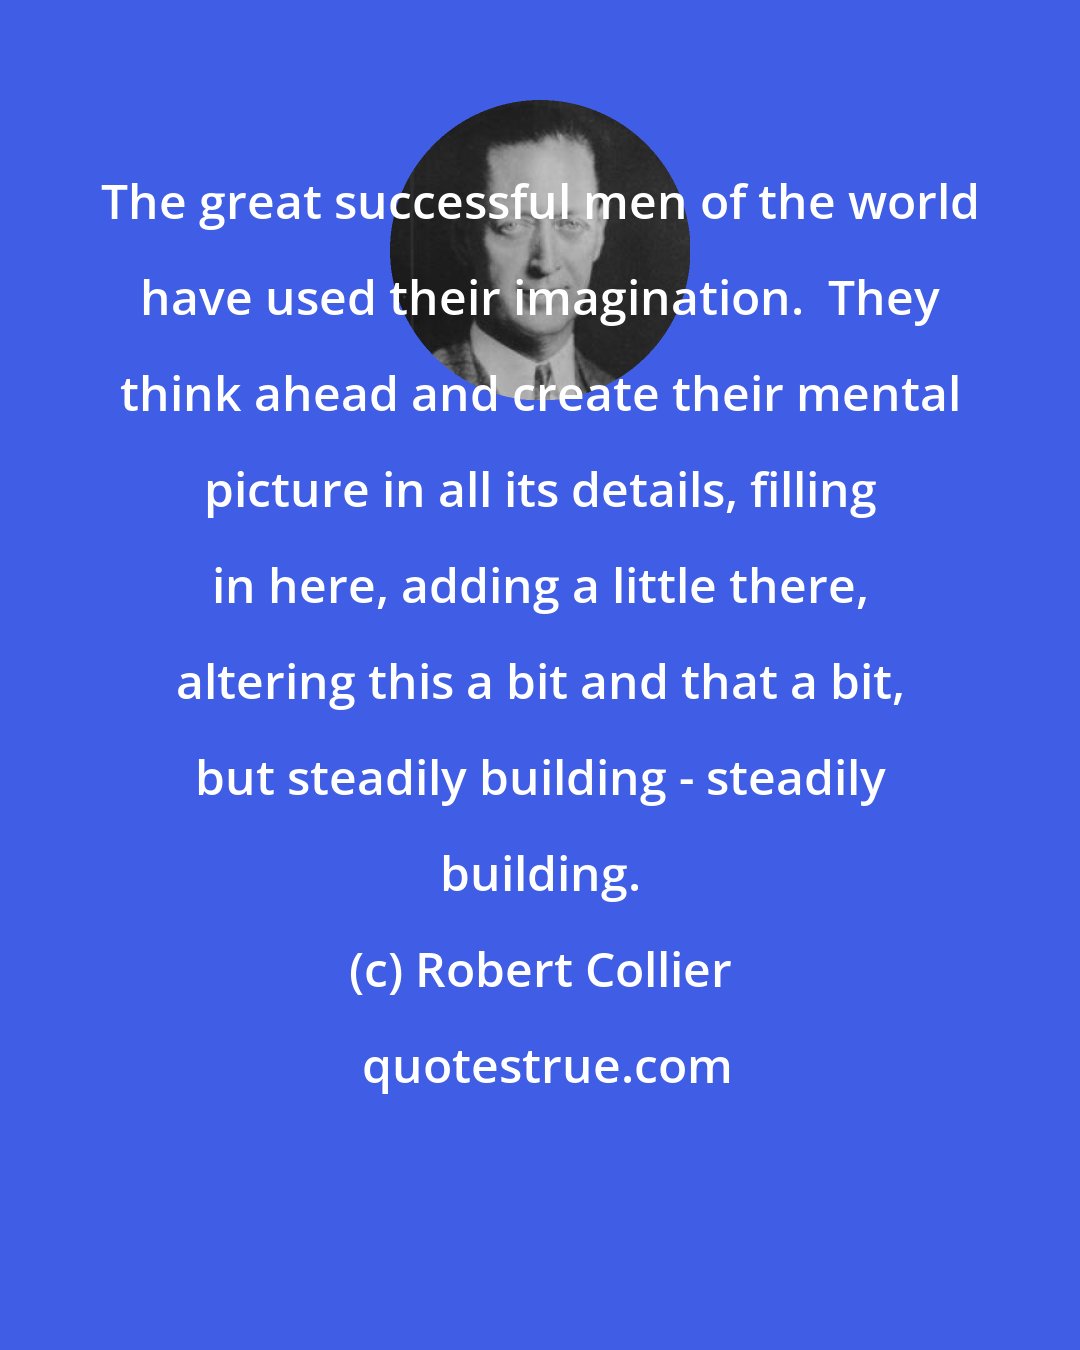 Robert Collier: The great successful men of the world have used their imagination.  They think ahead and create their mental picture in all its details, filling in here, adding a little there, altering this a bit and that a bit, but steadily building - steadily building.